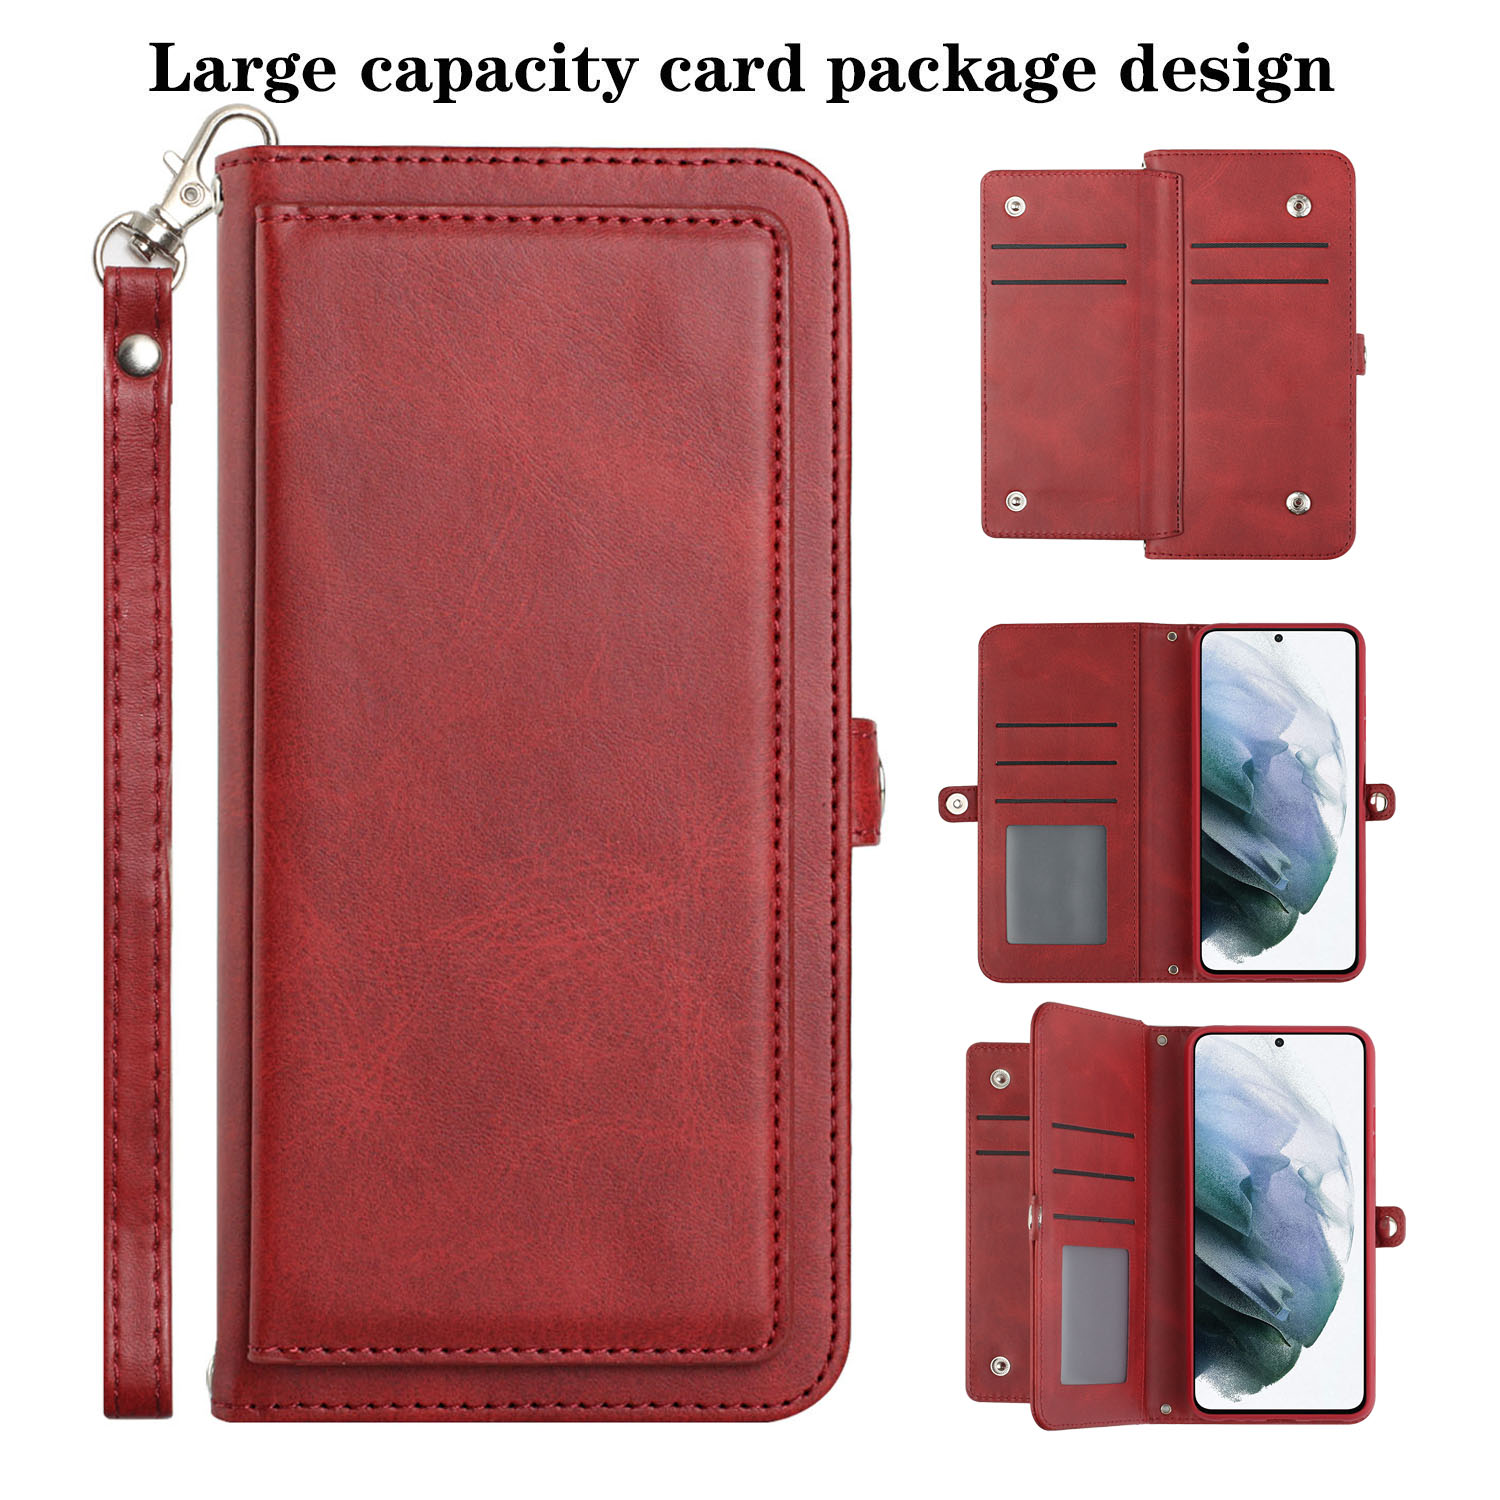 Premium Leather Folio WALLET Case for Moto G Pure / Moto G Power 2022 (Red)